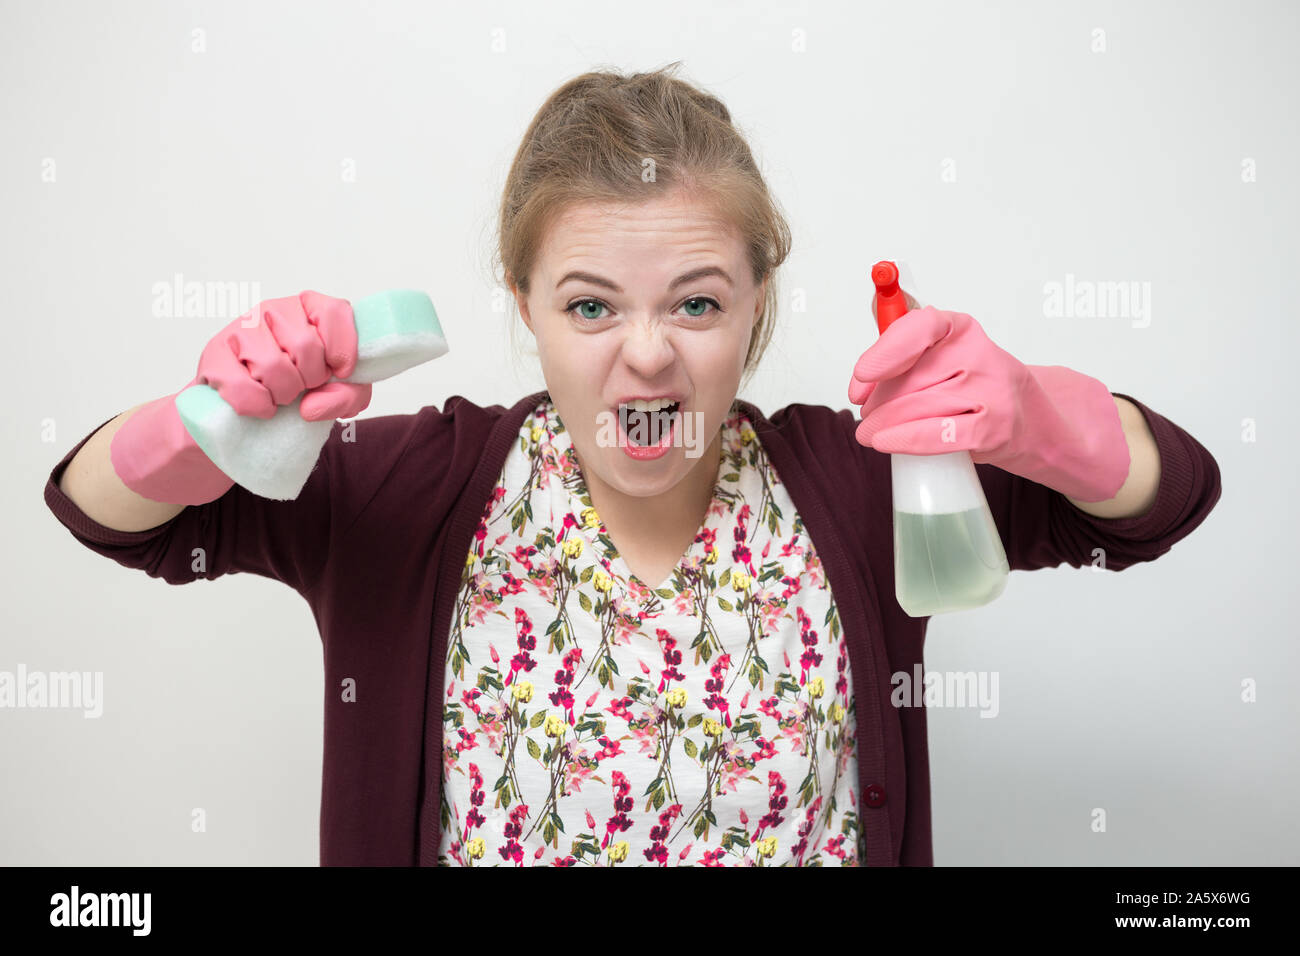 Woman in purple rubber gloves cleaning electric kettle with sponge Stock  Photo - Alamy